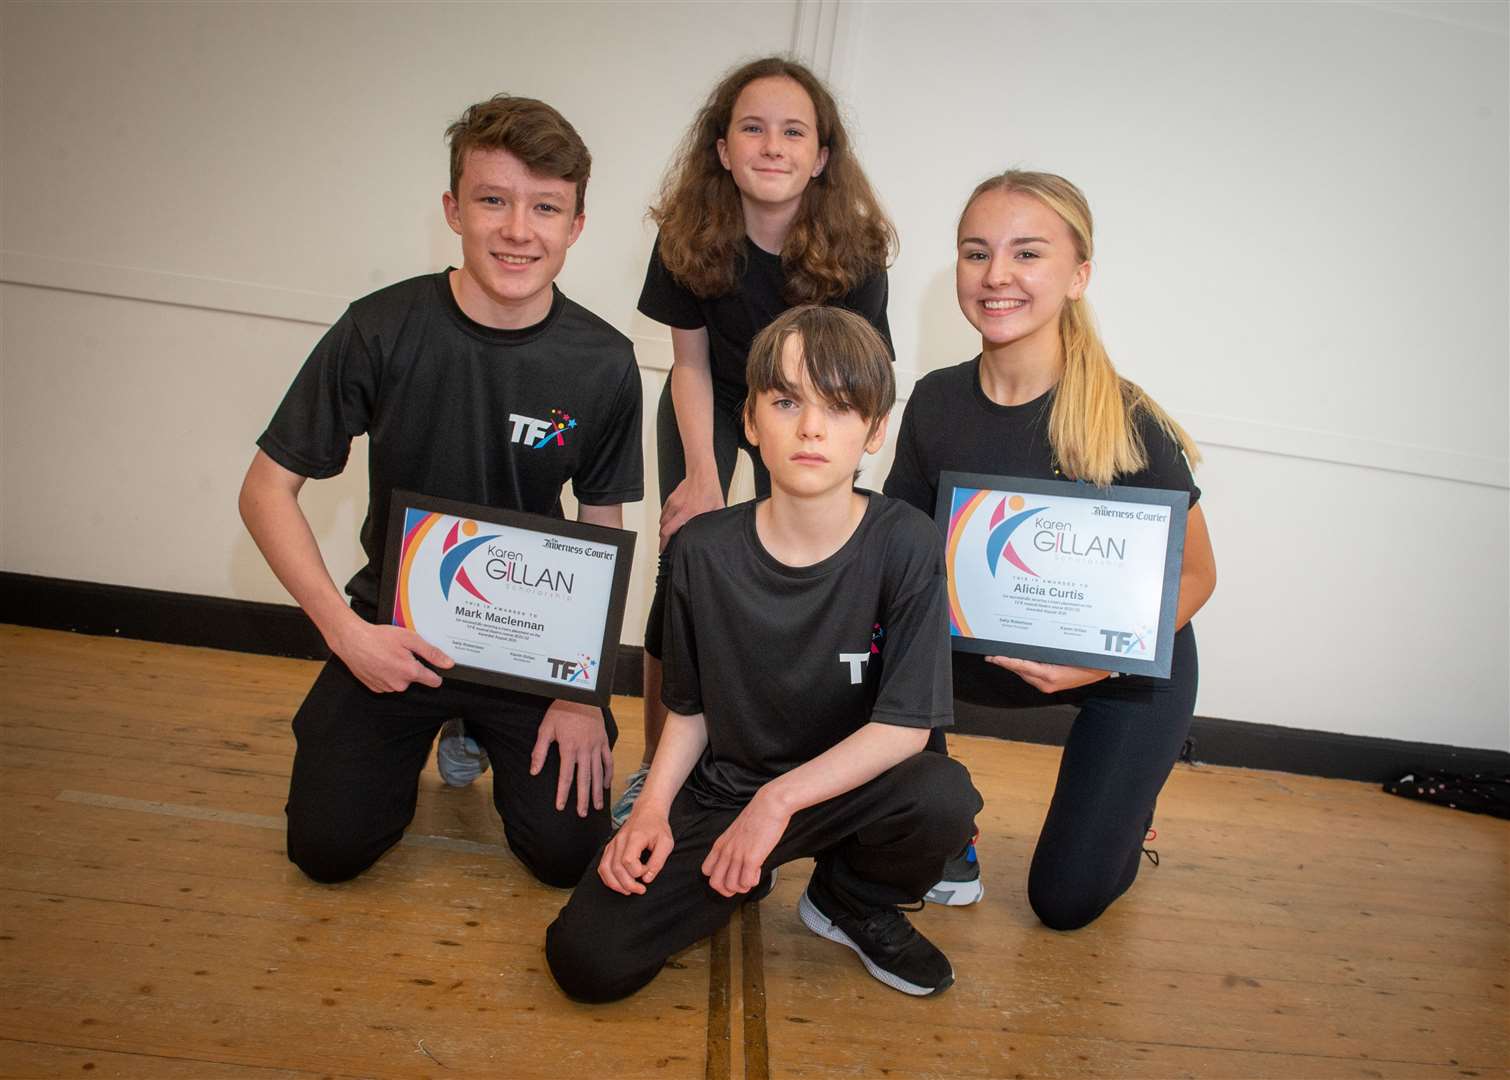 TFX competition winners with their certificates, Old Hall, Inverness...Mark Maclennan, Molly Newell, Alicia Curtis and Spike Coates (front)...Picture: Callum Mackay..